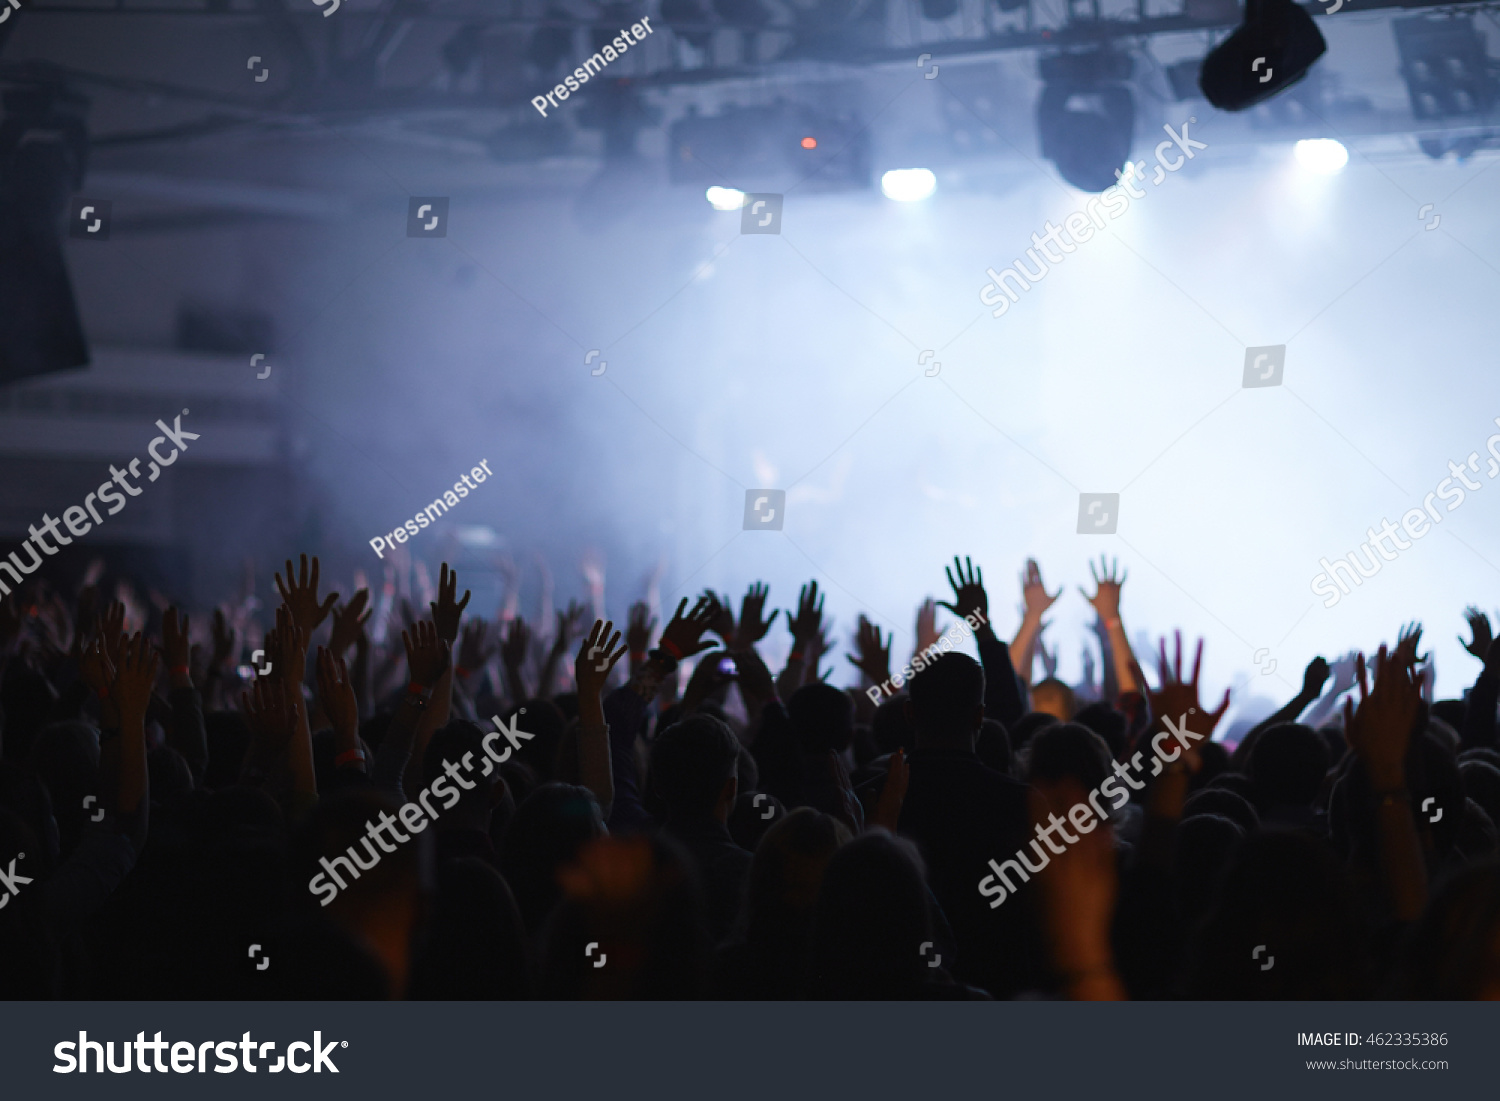 Cheering fans having fun at live concert #462335386